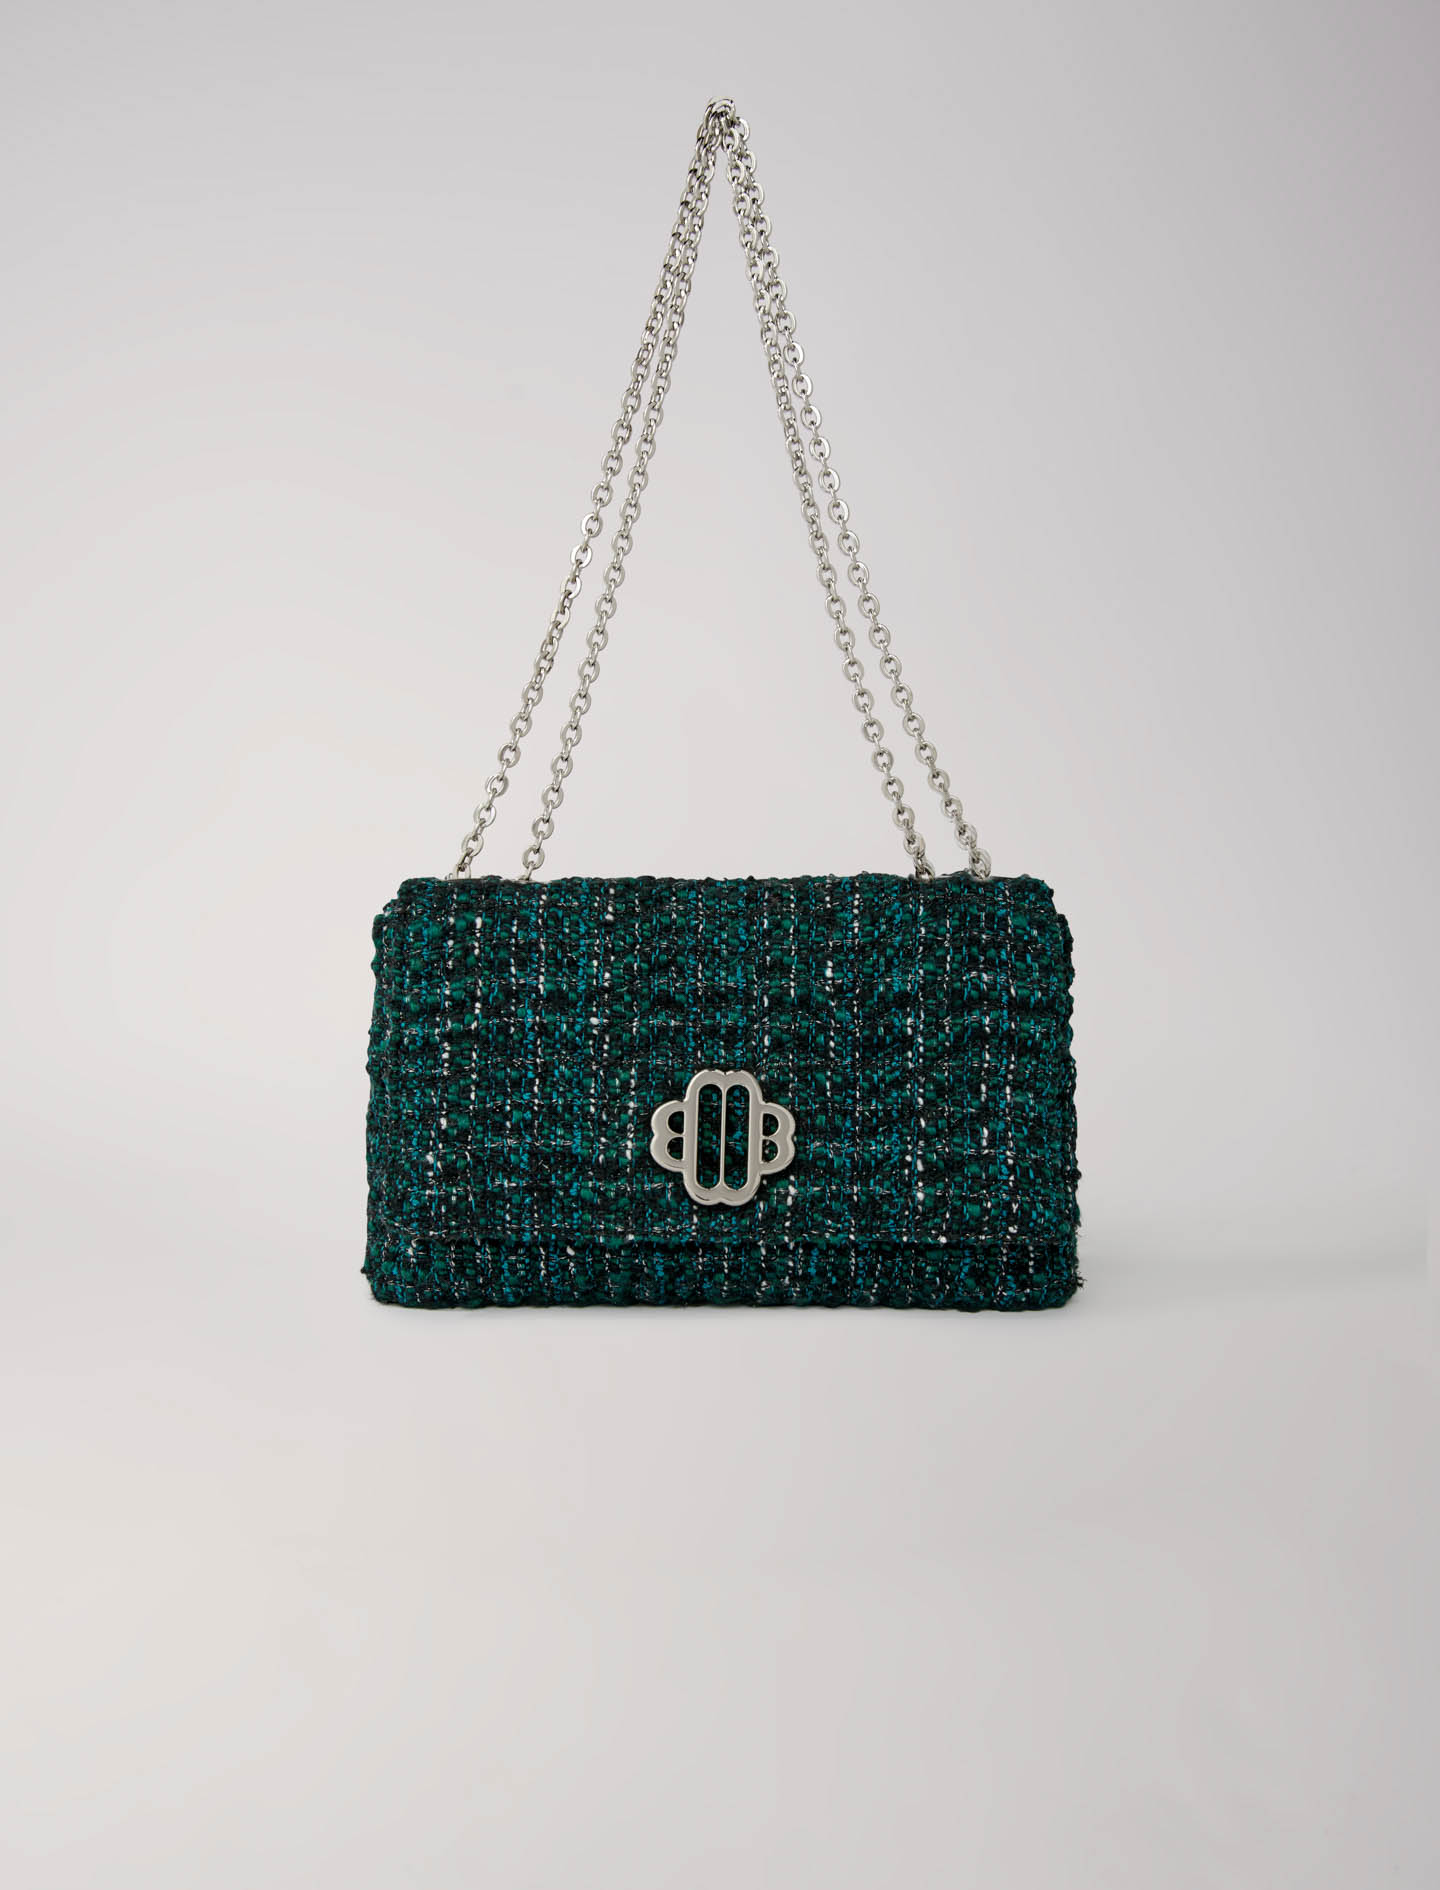 Mixte's cotton, Clover bag in tweed for Fall/Winter, size Mixte-All Bags-OS (ONE SIZE), in color Bottle Green /